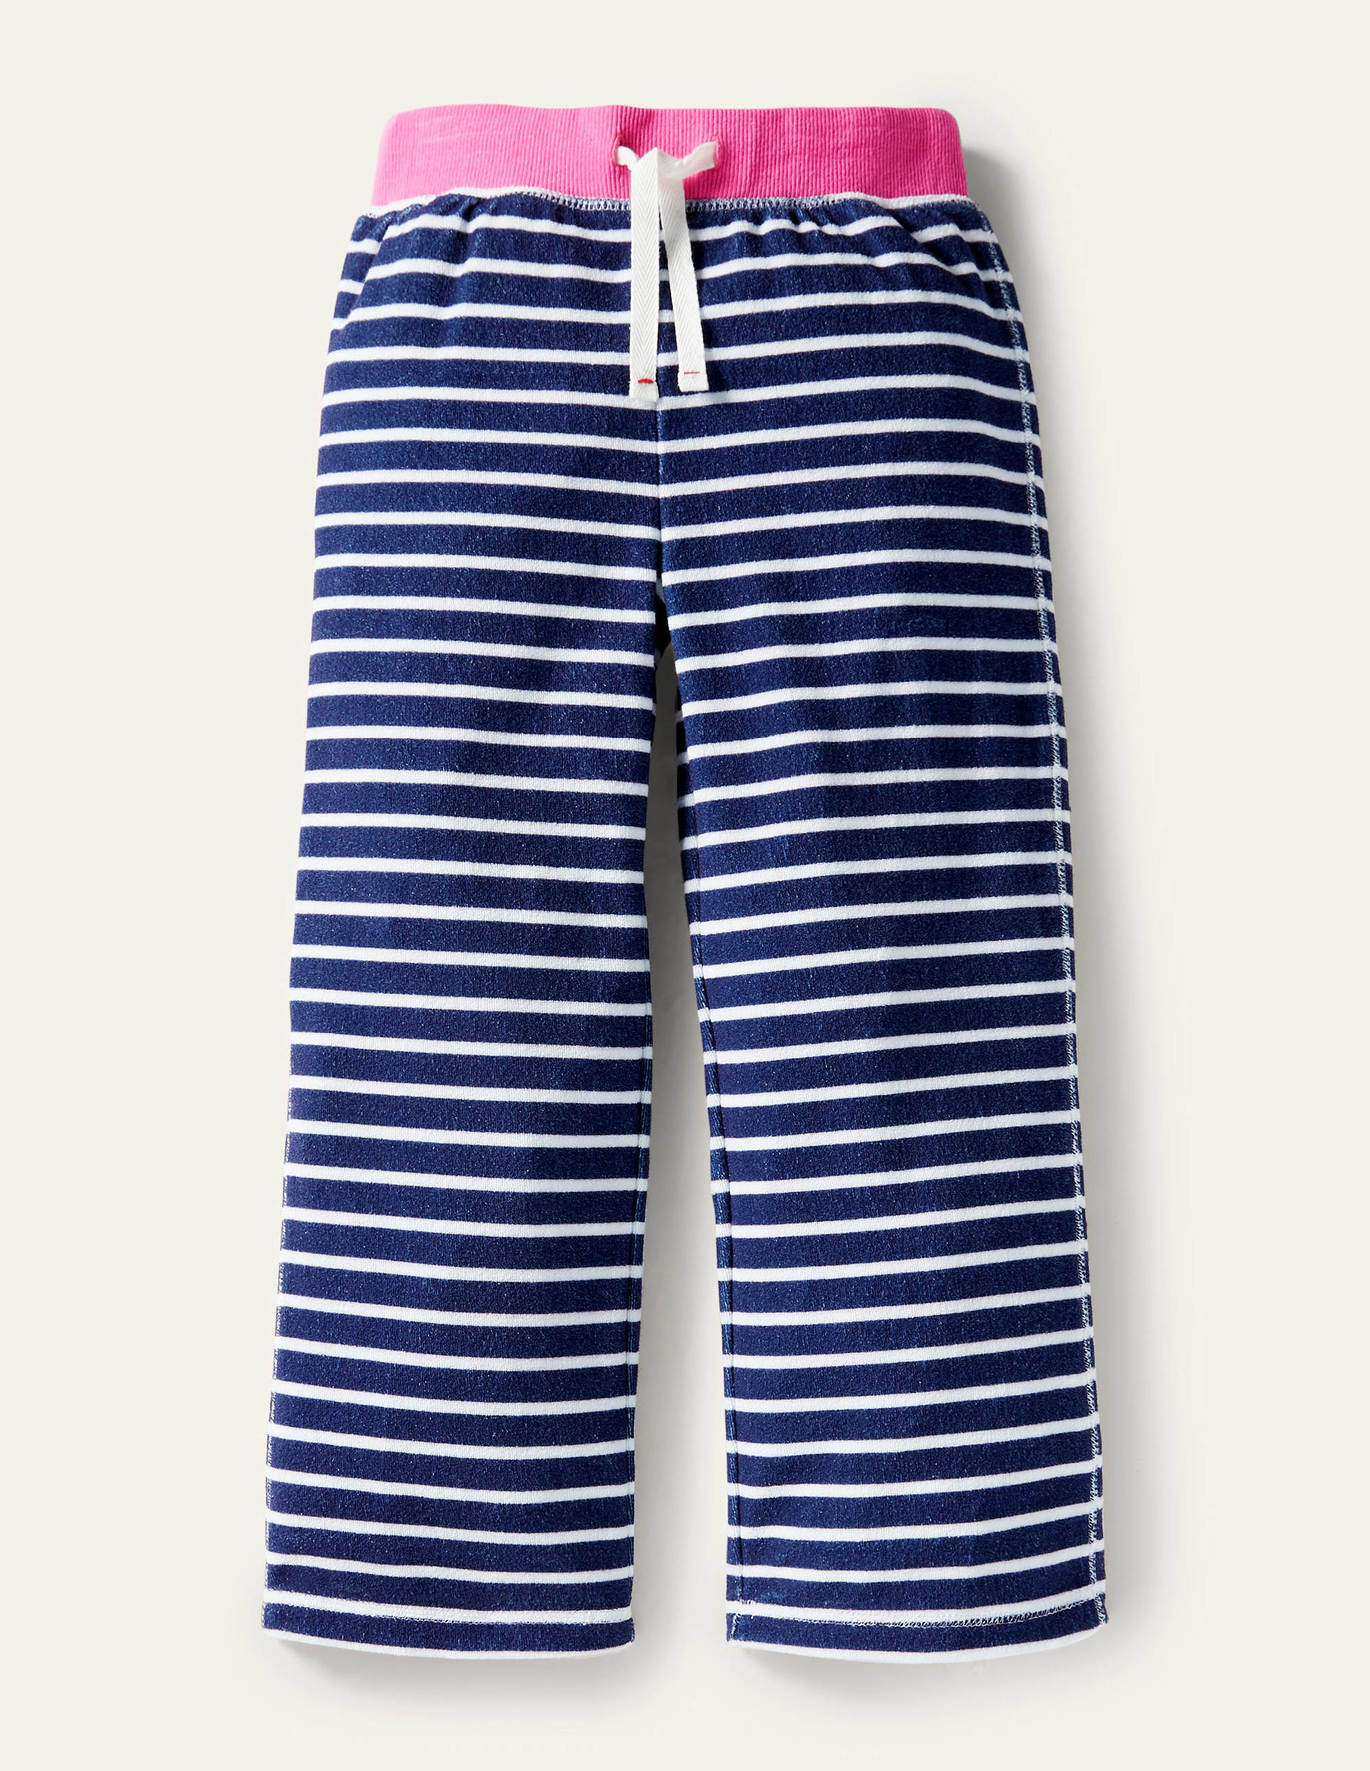 Boden Towelling Pants - College Navy/Ivory